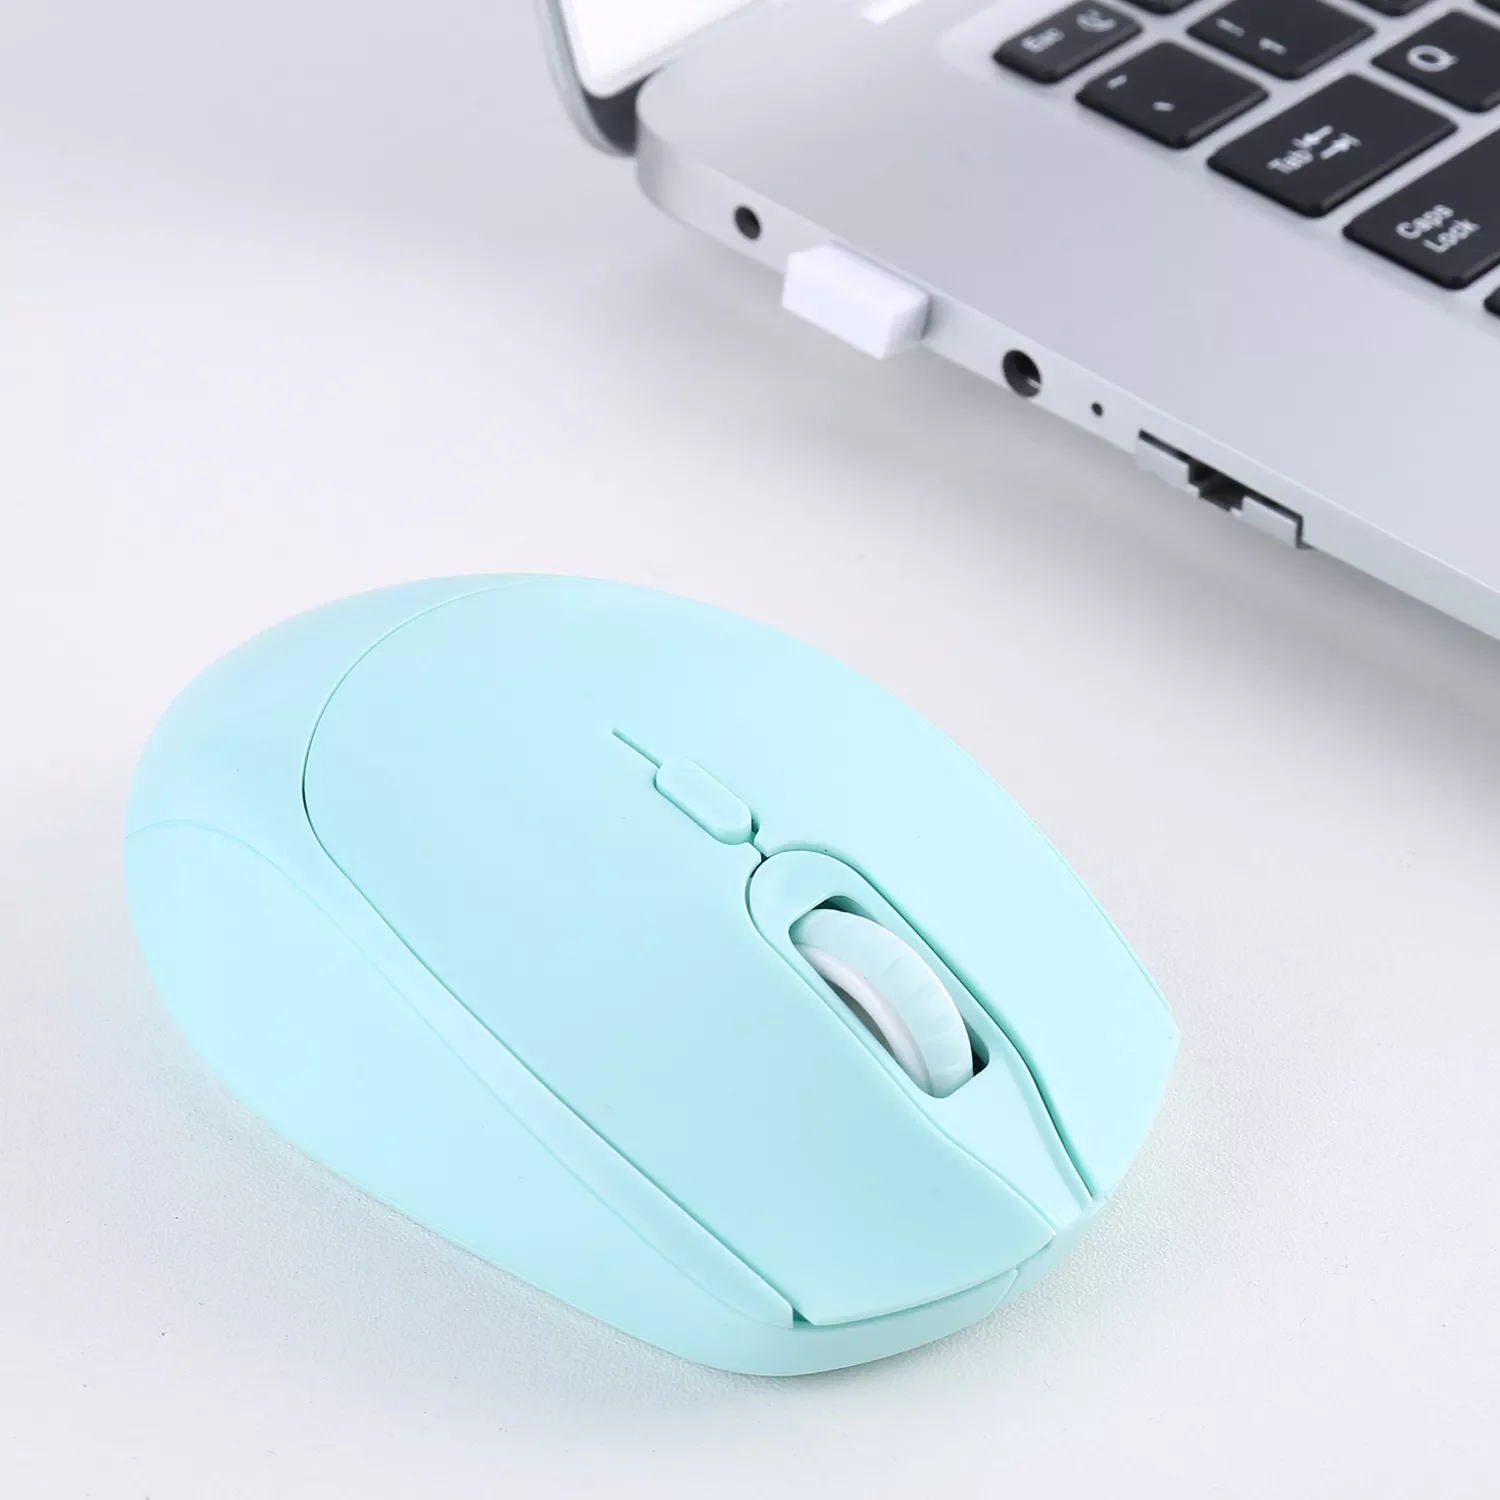 

2022NEW Mouse 2.4G Noiseless Mouse with USB Receiver Portable for Windows 2000/ME/XP/vista/7/8/10/mac